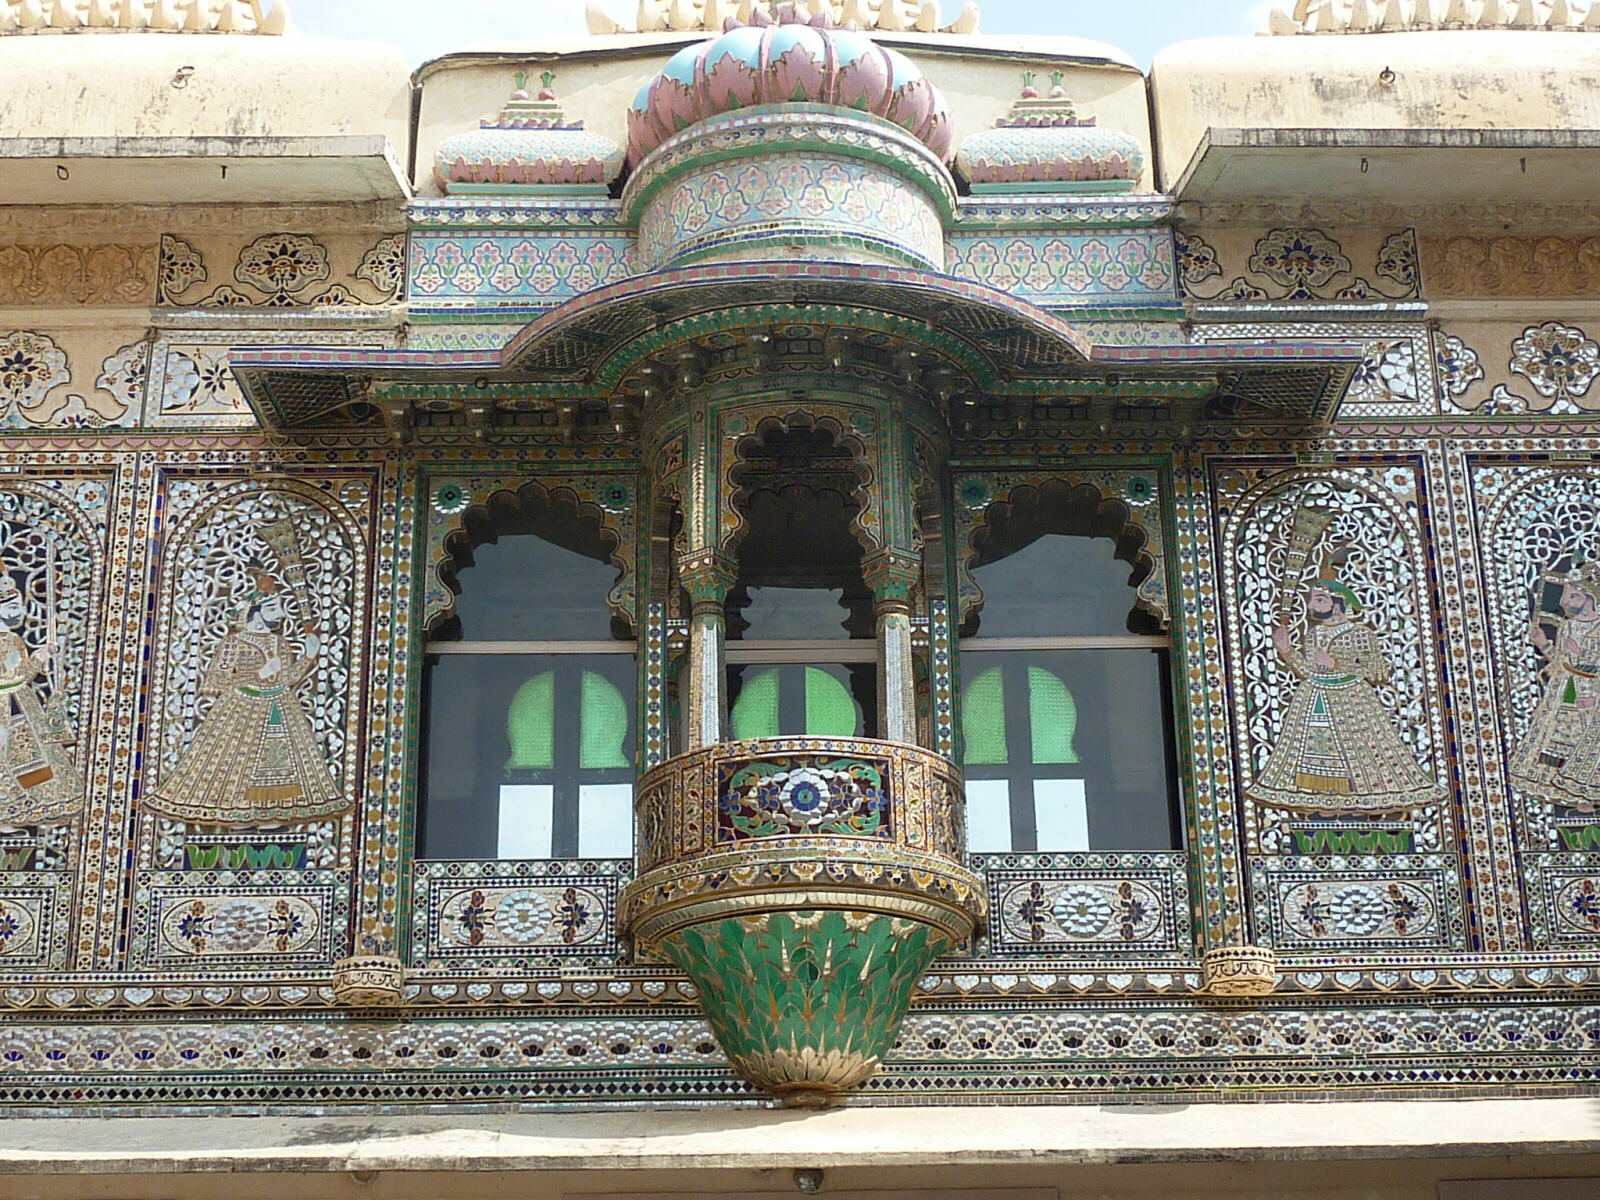 A window in the City Palace in Udaipur, Rajasthan